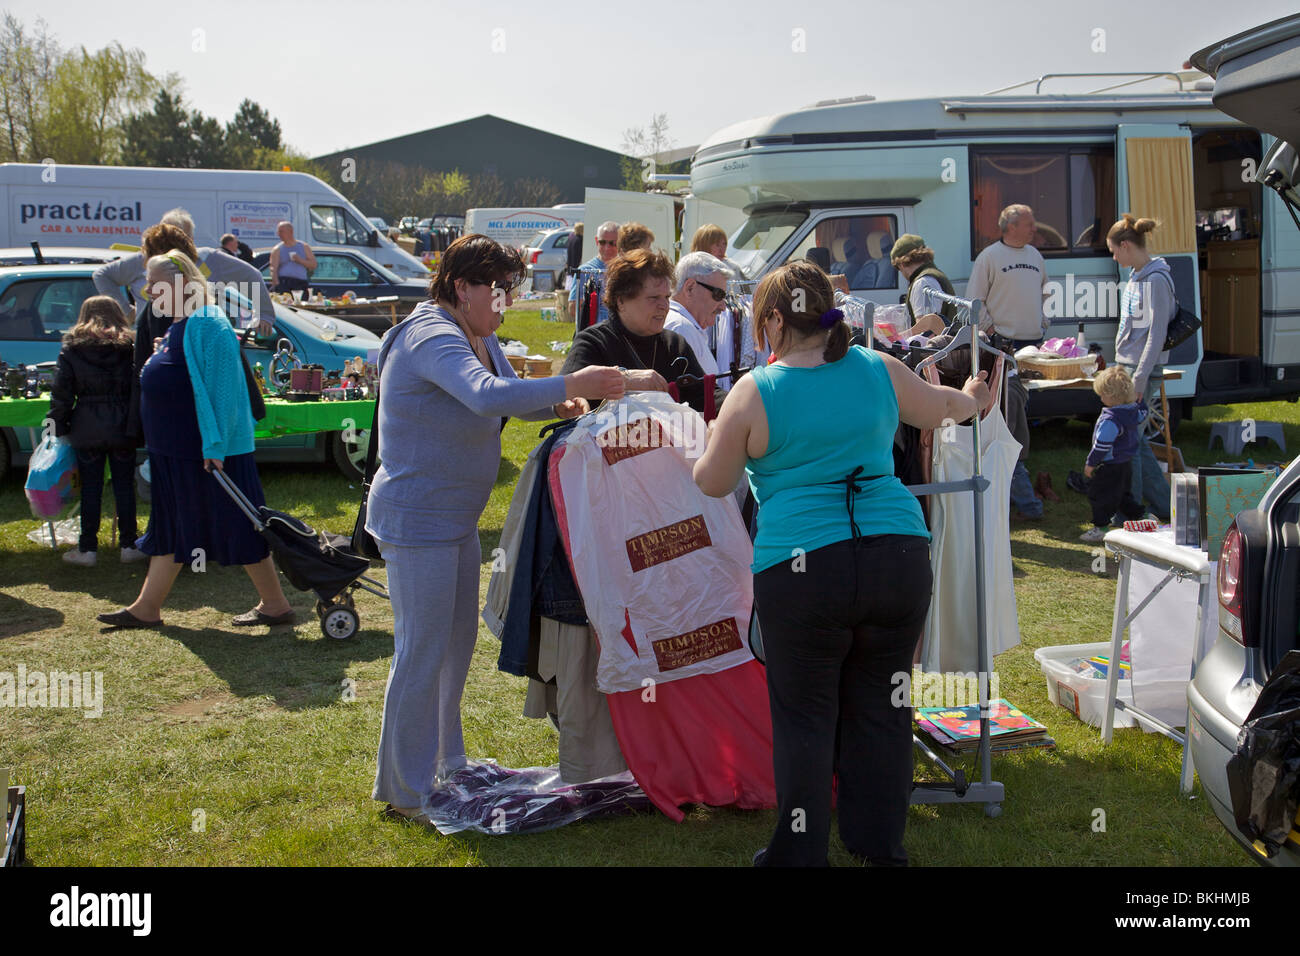 A car boot sale in England Stock Photo